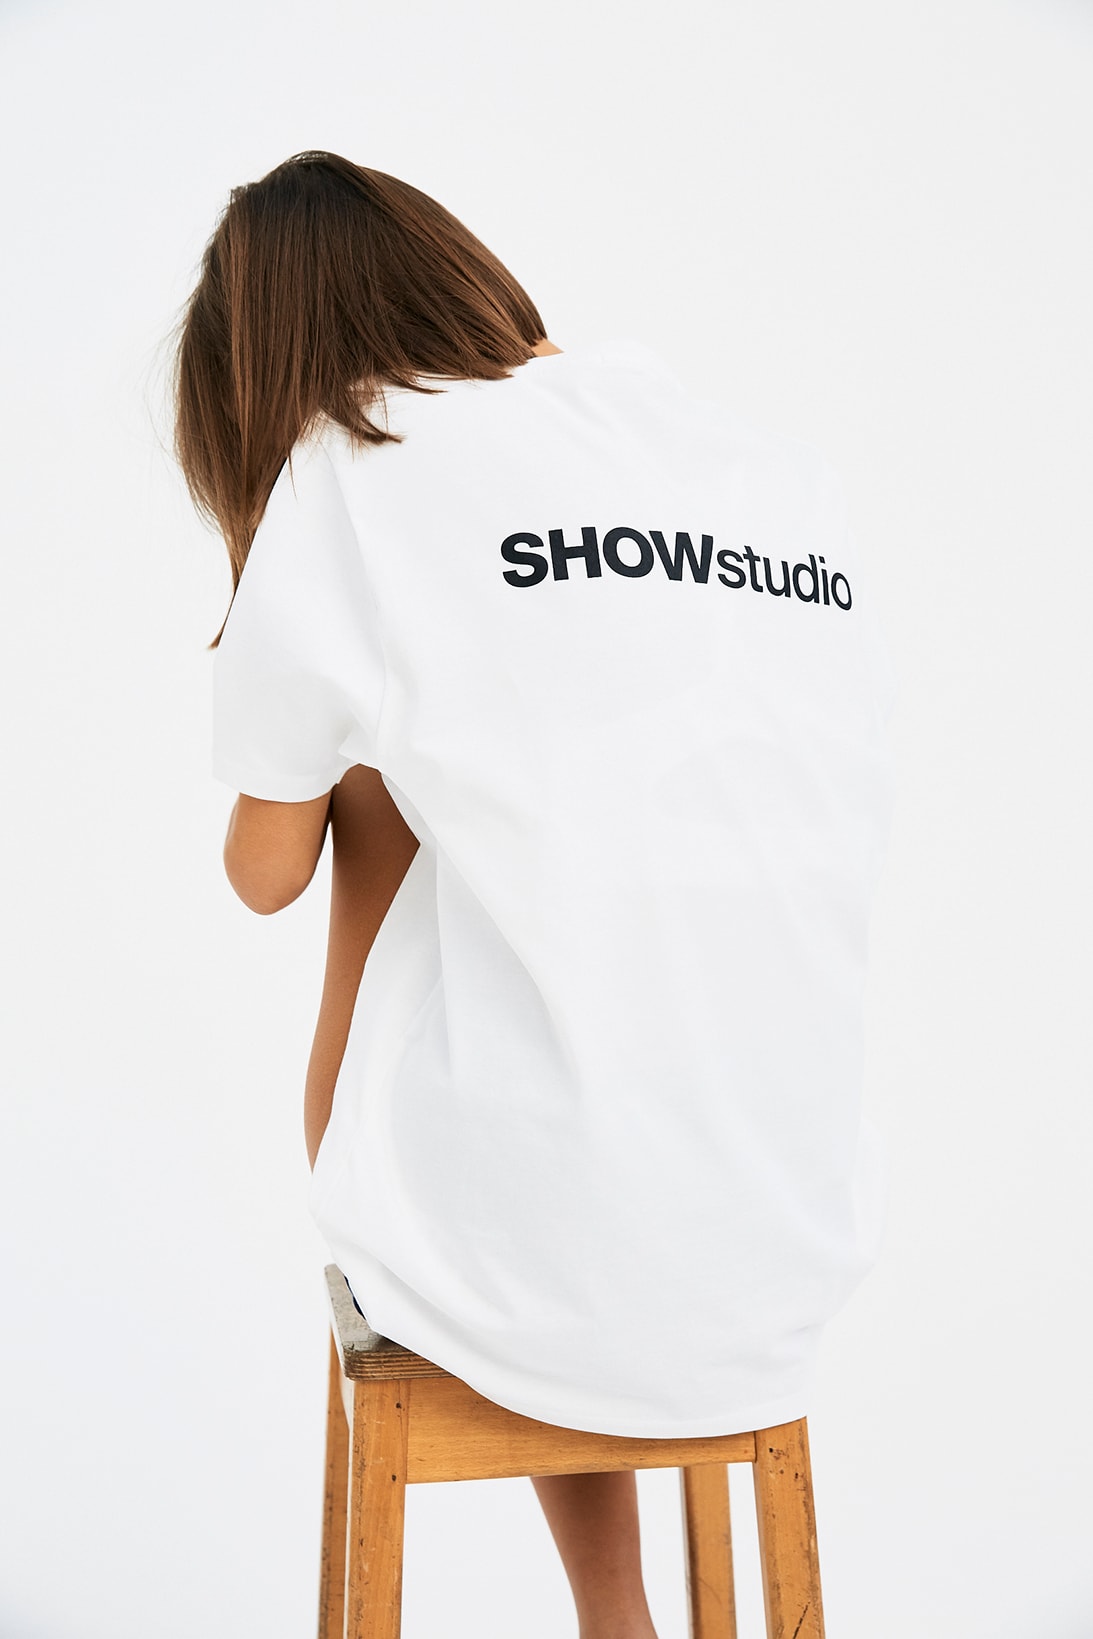 SHOWstudio Fashion Illustration Gallery Pop Up Merch Covent Garden Floral Street T Shirt Tote Bag London